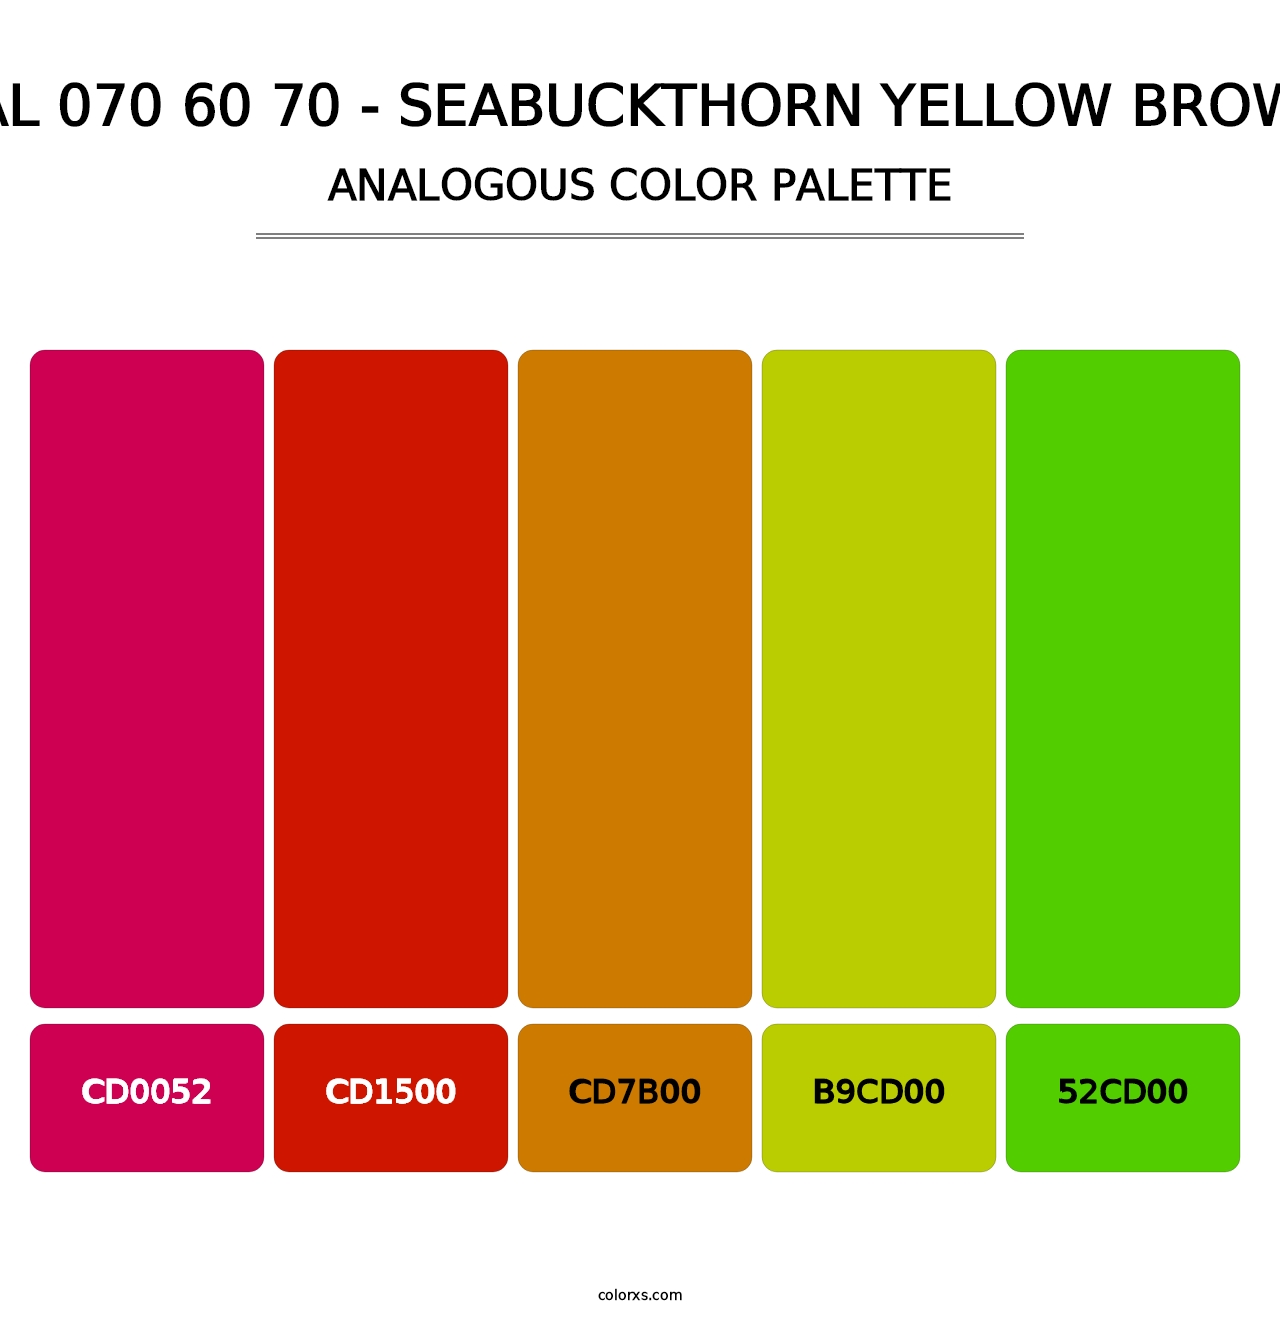 RAL 070 60 70 - Seabuckthorn Yellow Brown - Analogous Color Palette